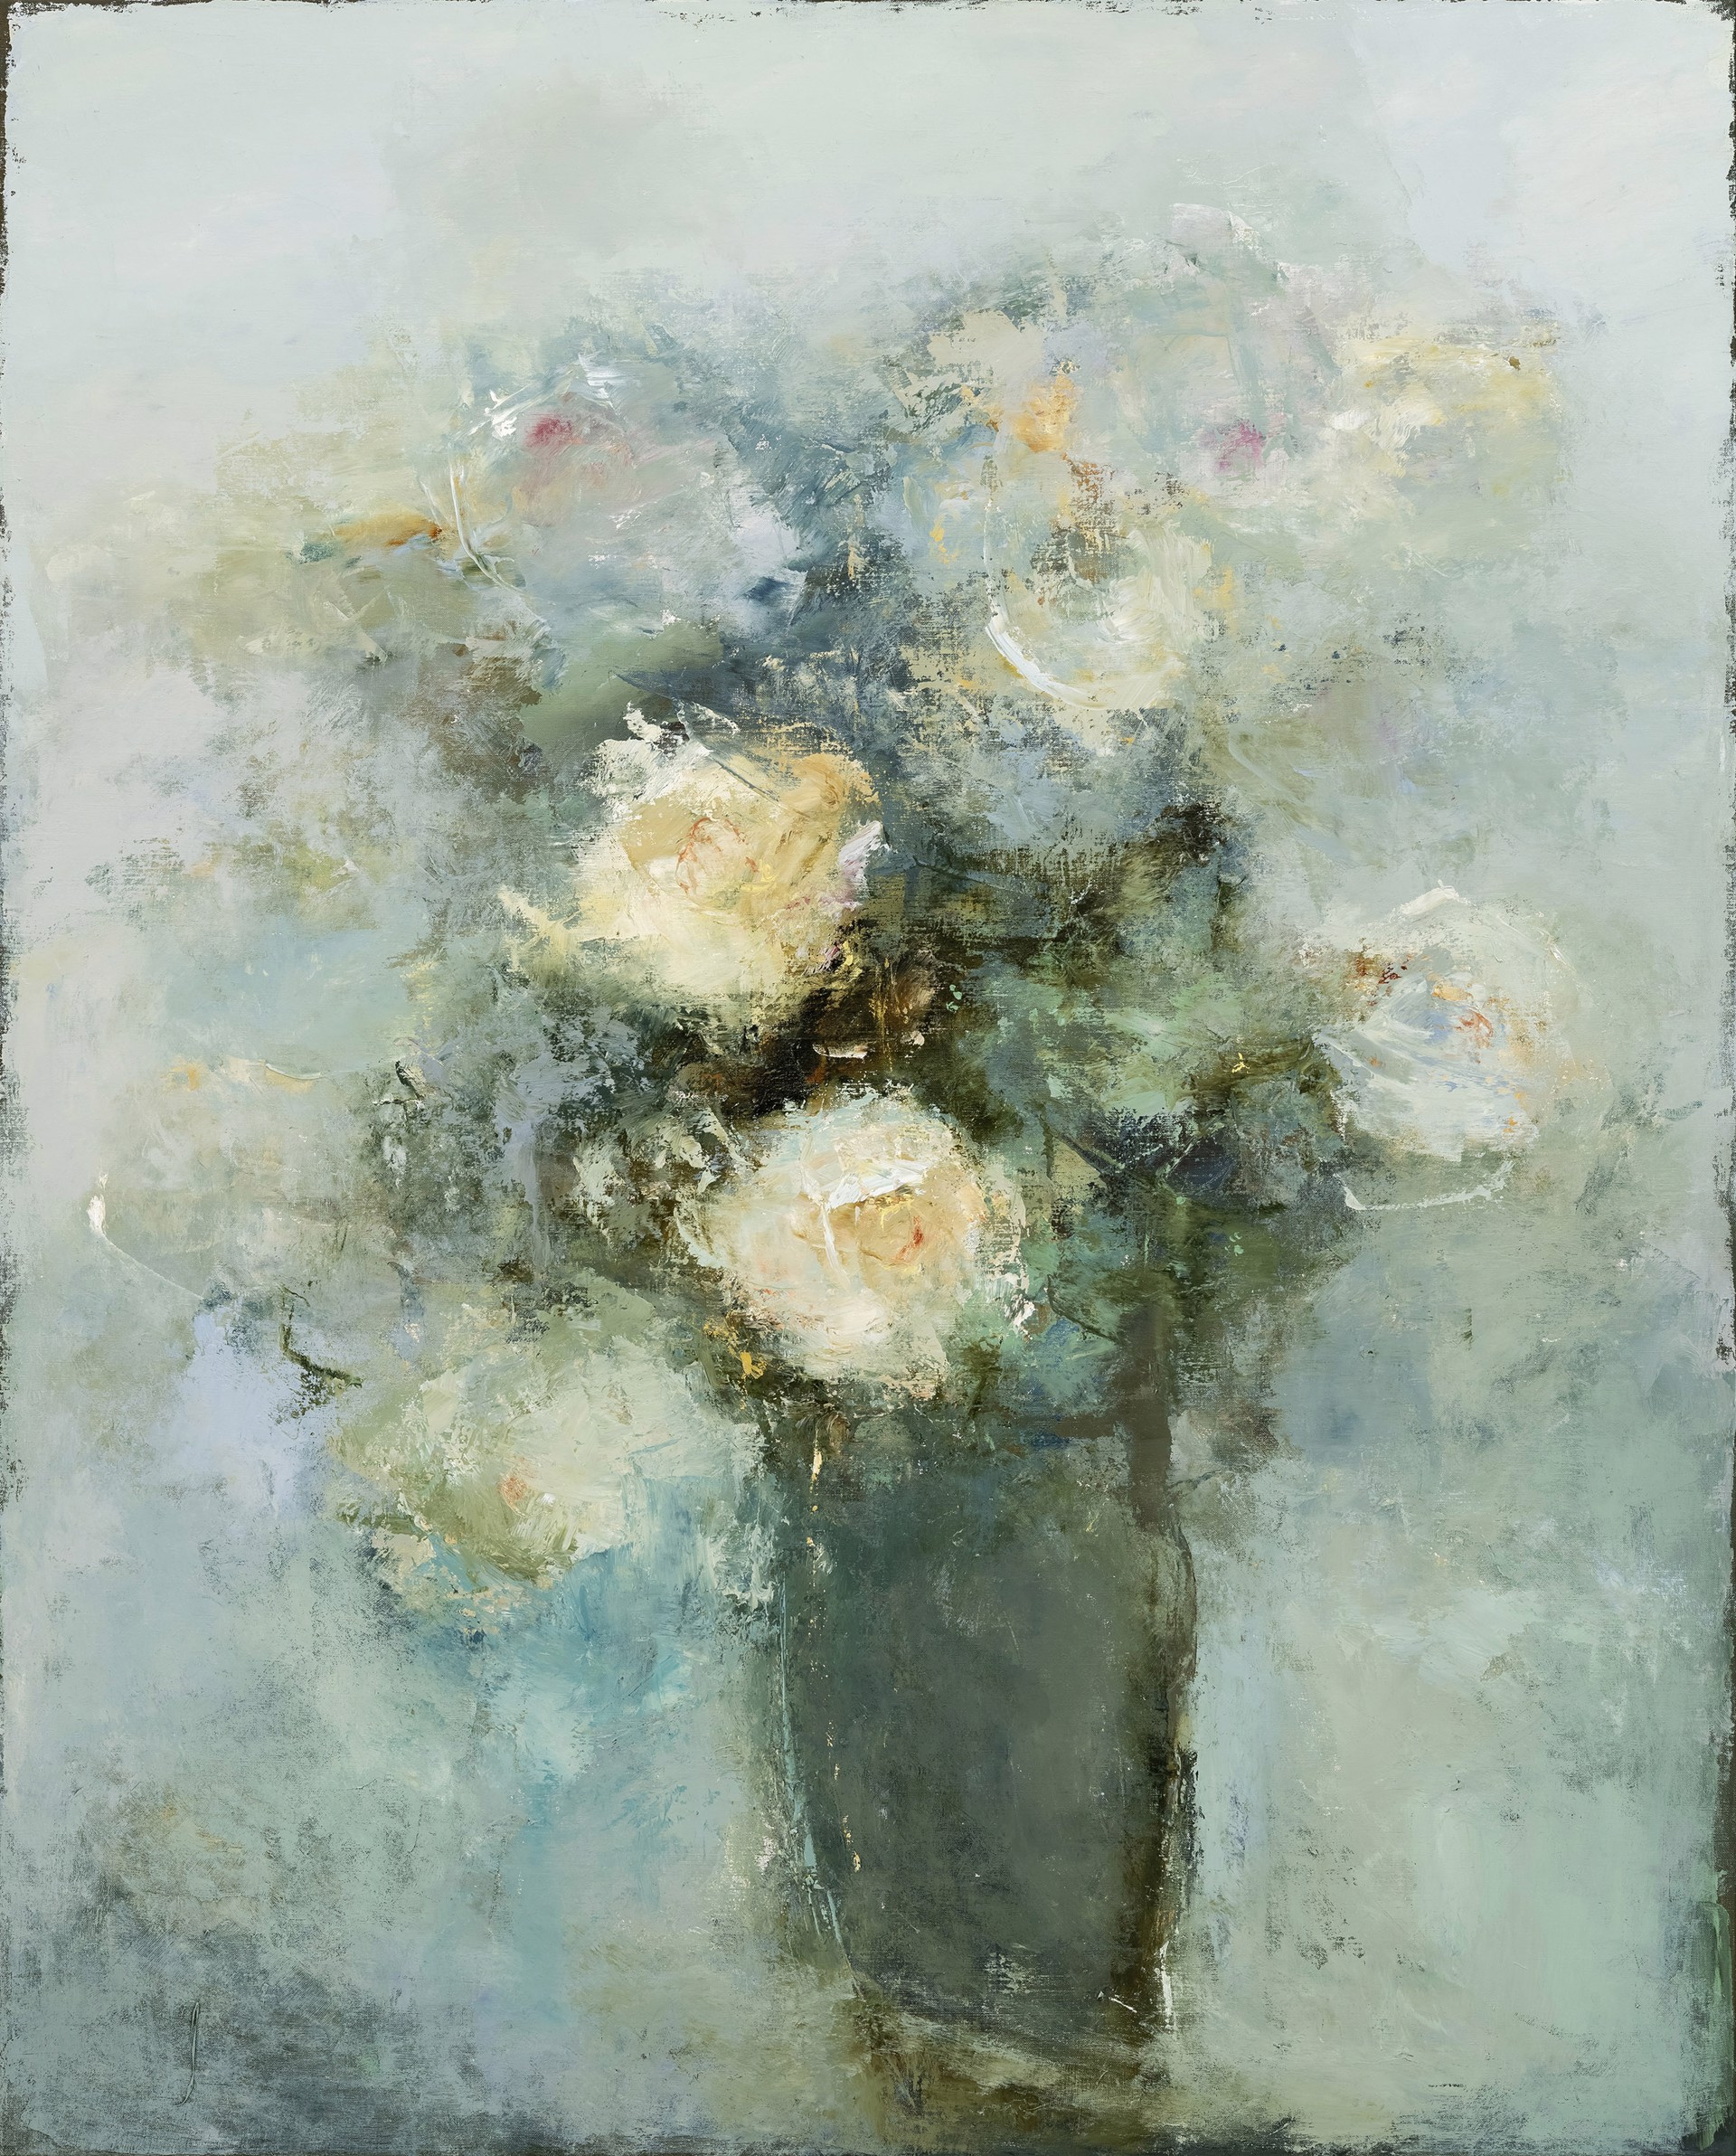 I Pay in Satin Cash, a Petal for a Photograph by France Jodoin